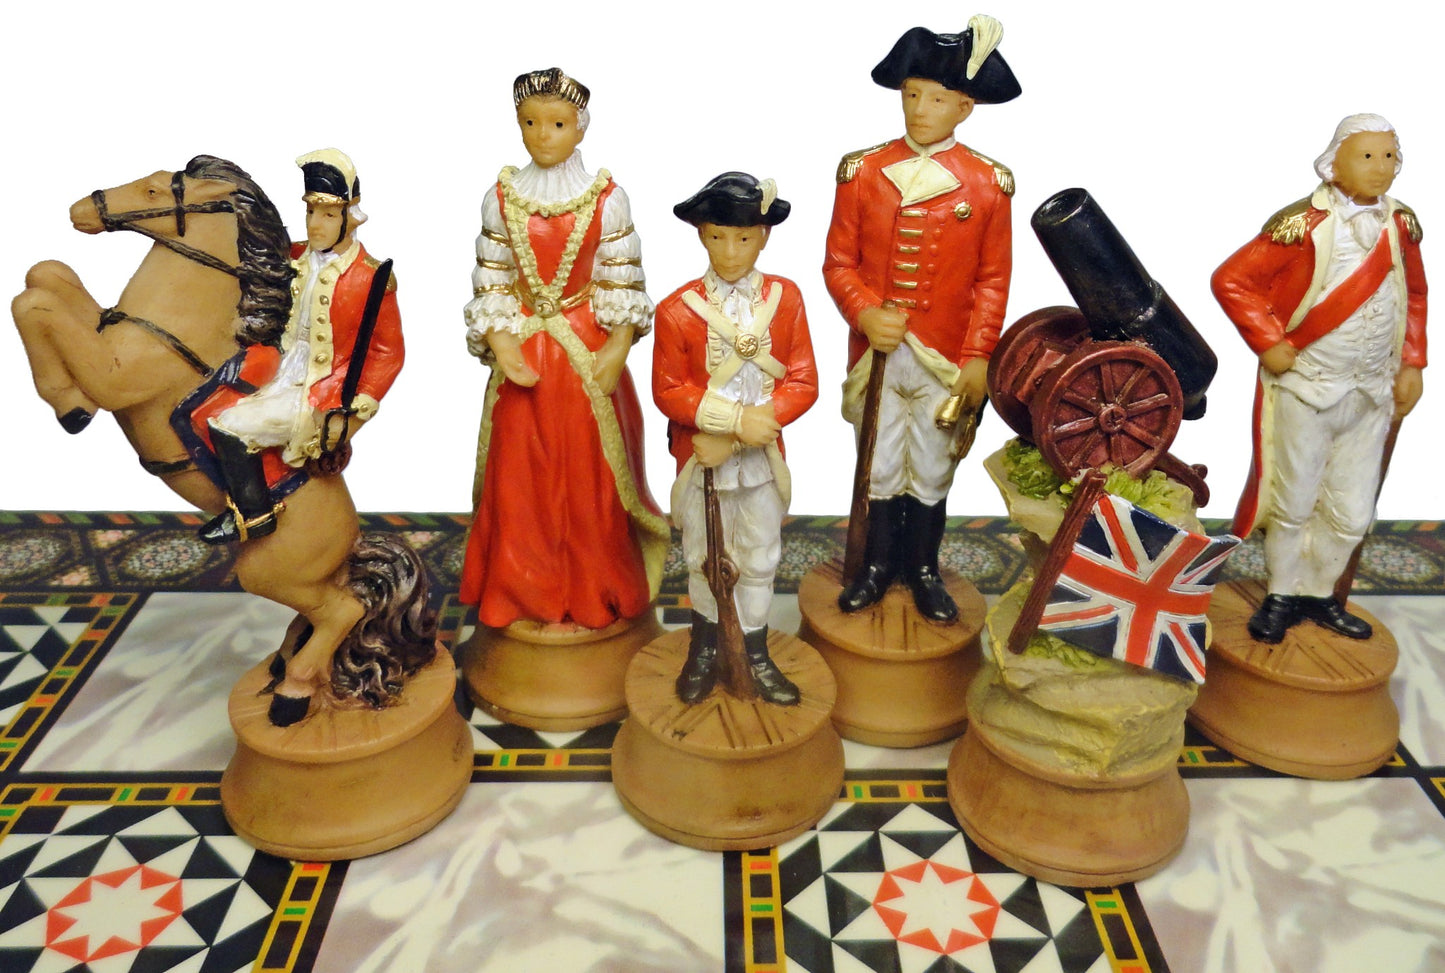 American Revolutionary War Chess Set W/ Mosaic DESIGN Board 14" Independence